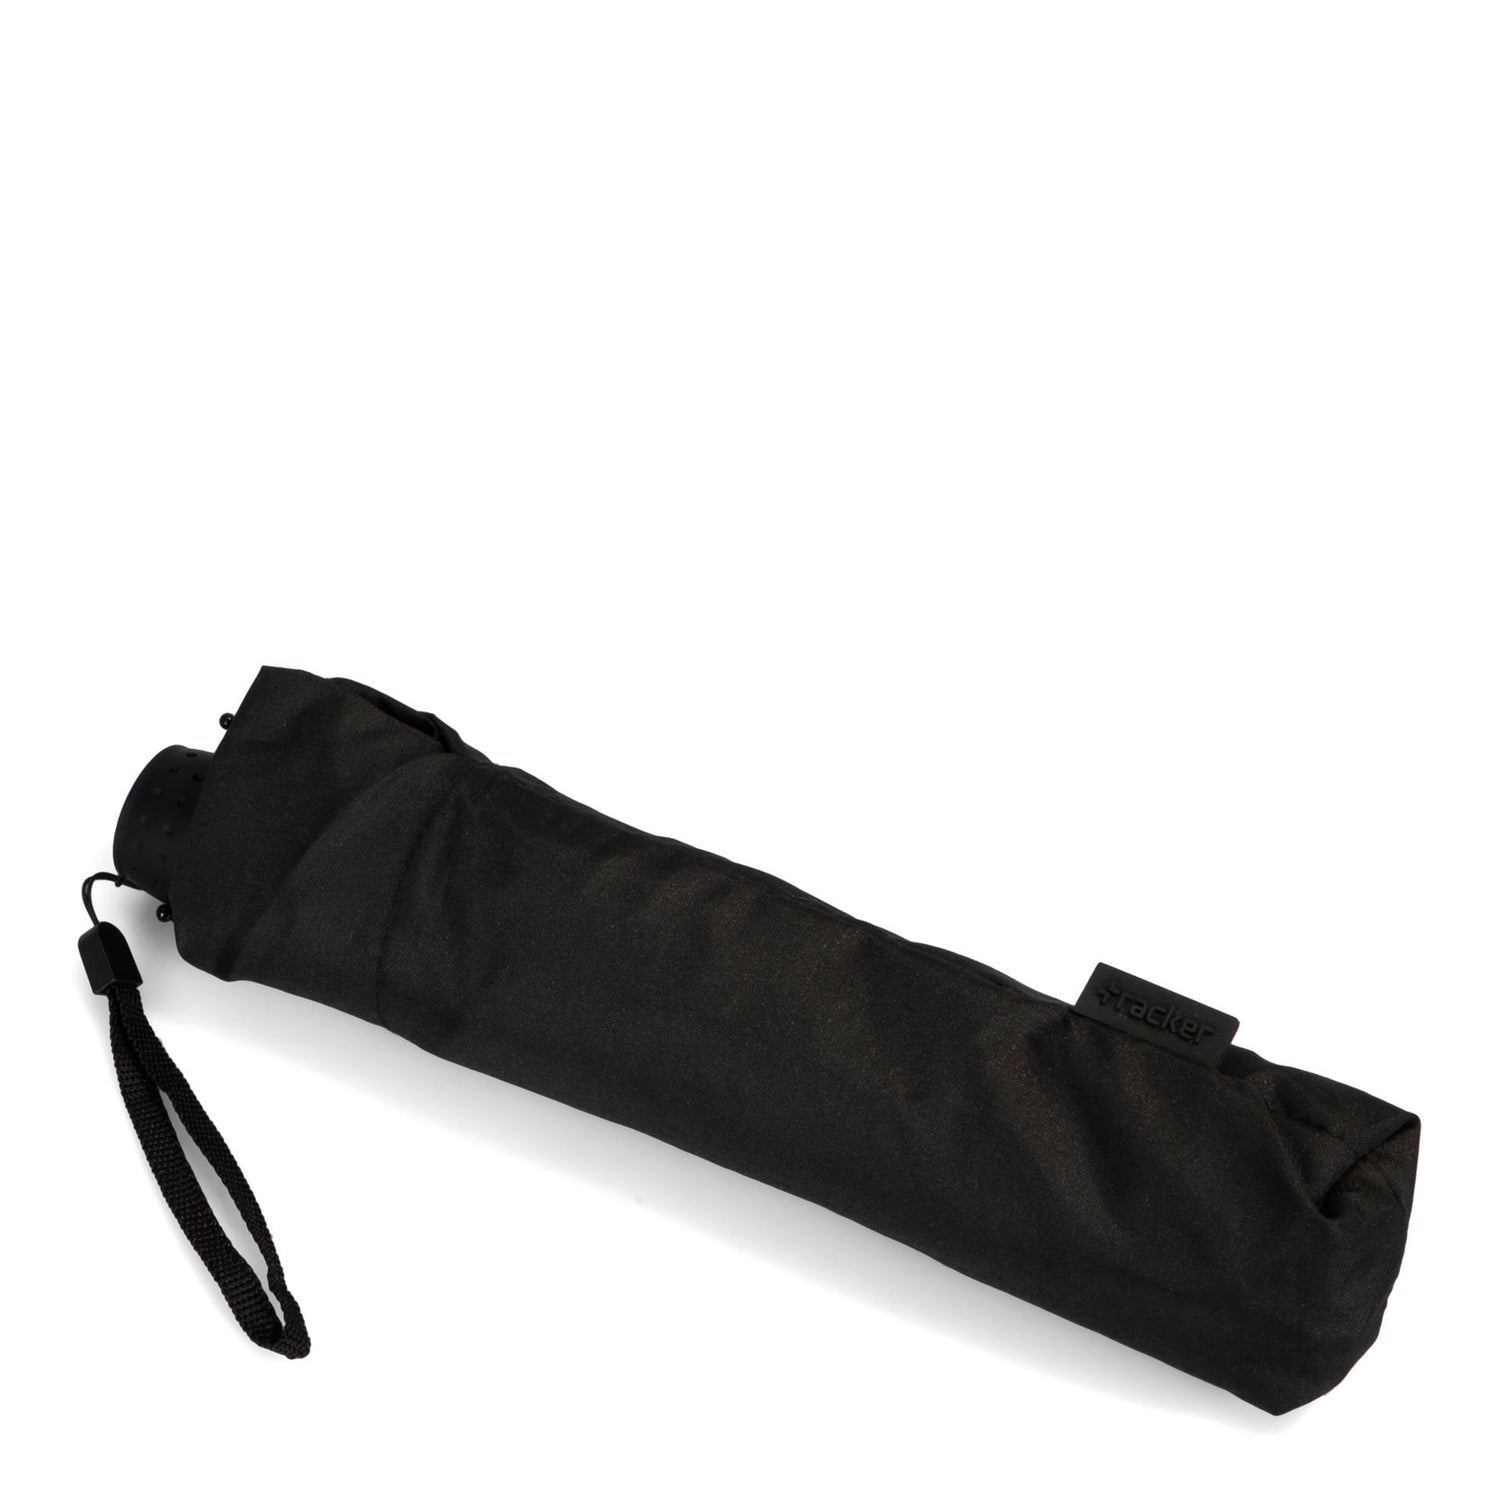 Side view of a black unisex umbrella called Tiny Manual designed by Tracker that is inside its included pouch.